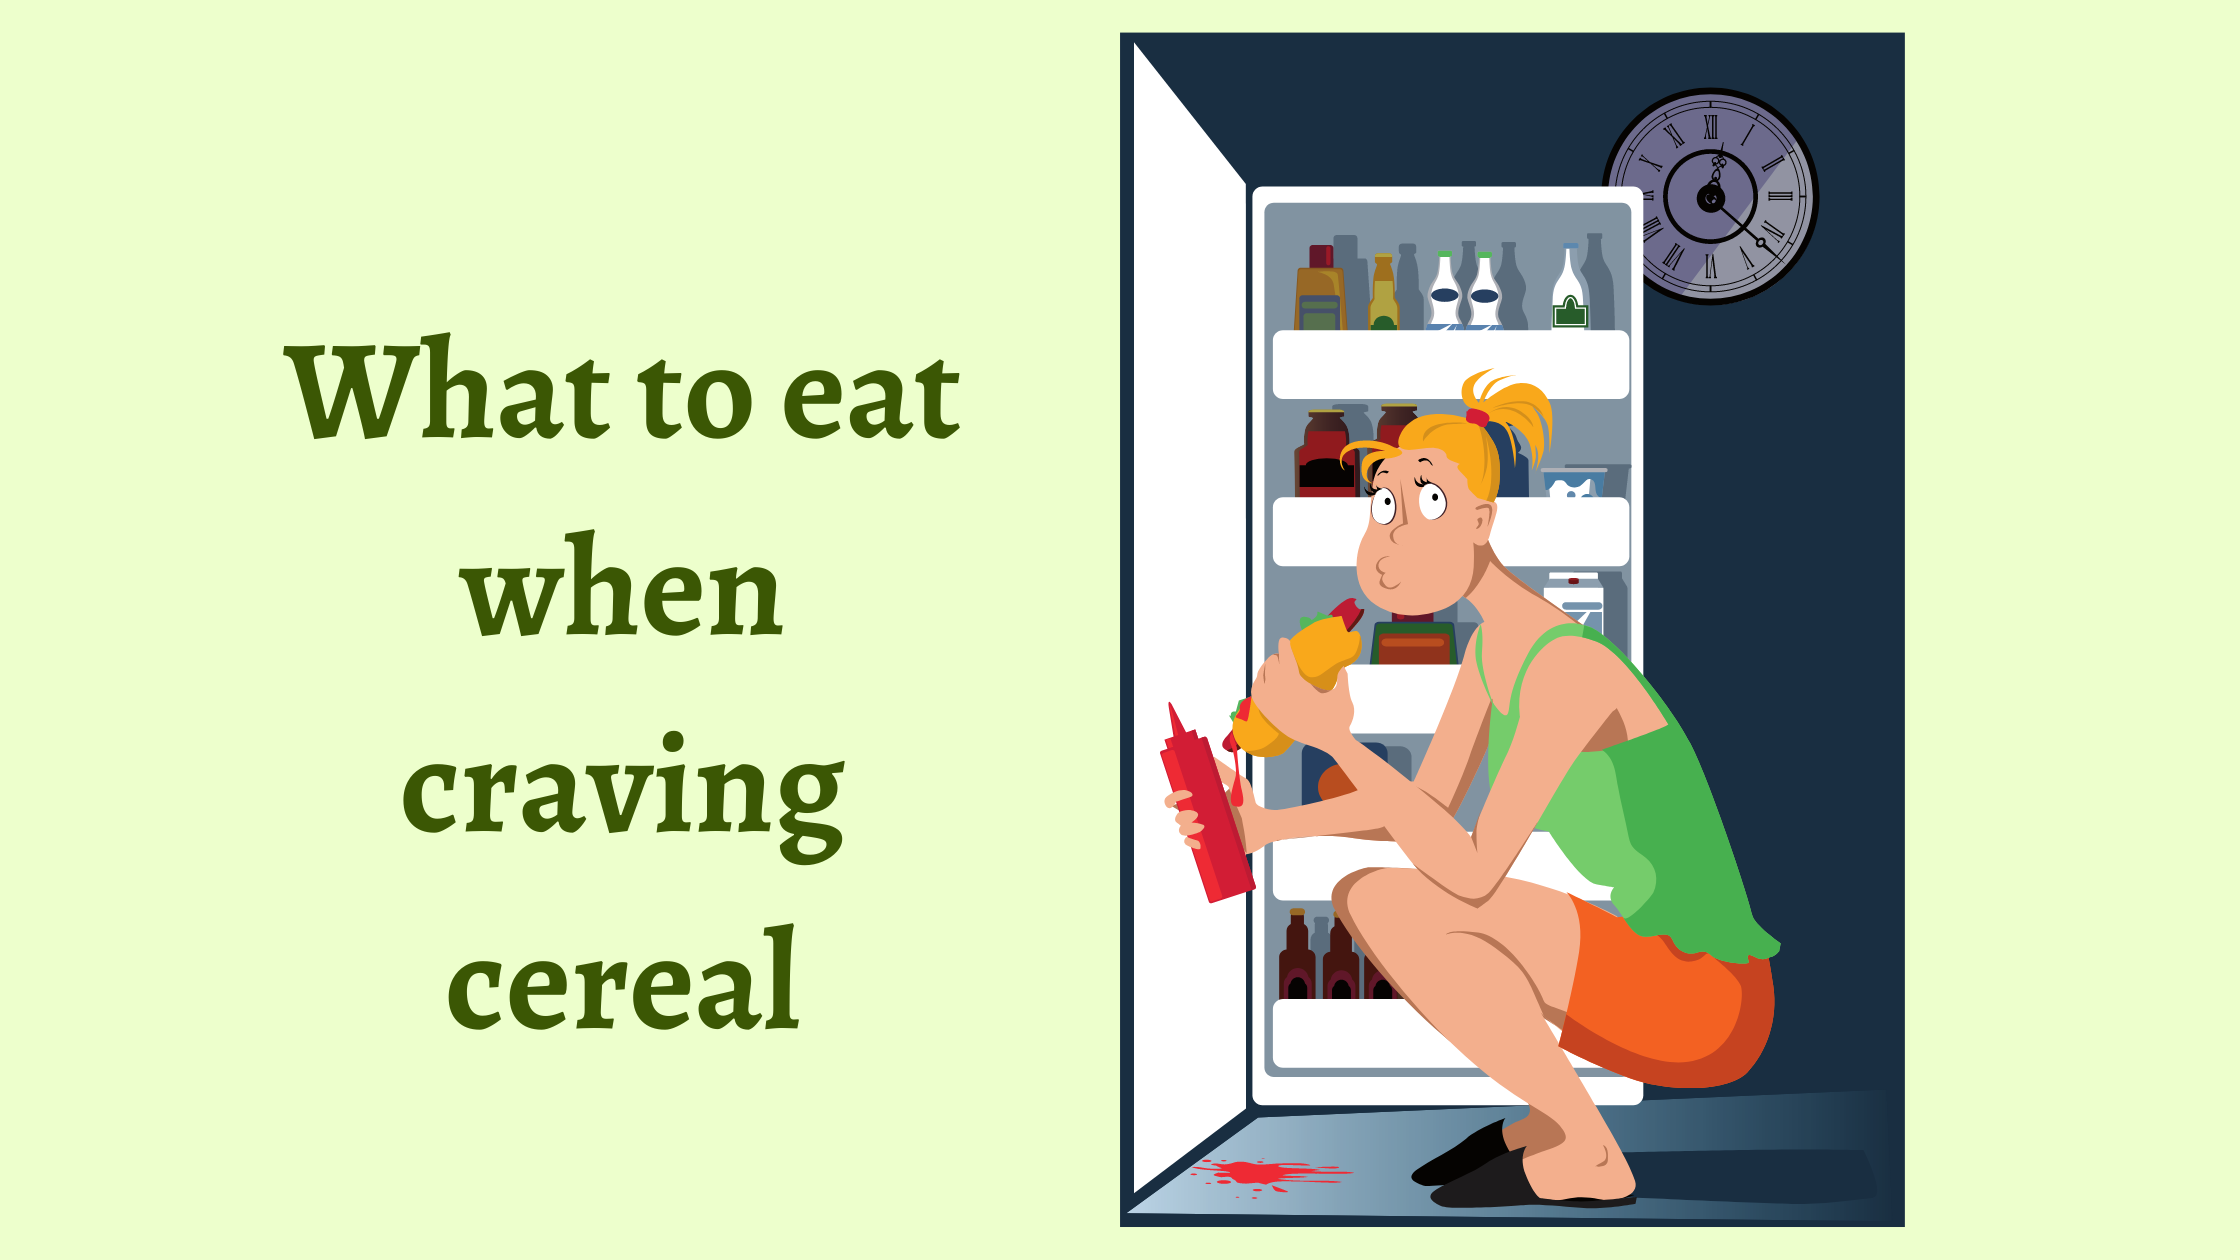 What to eat when craving cereal